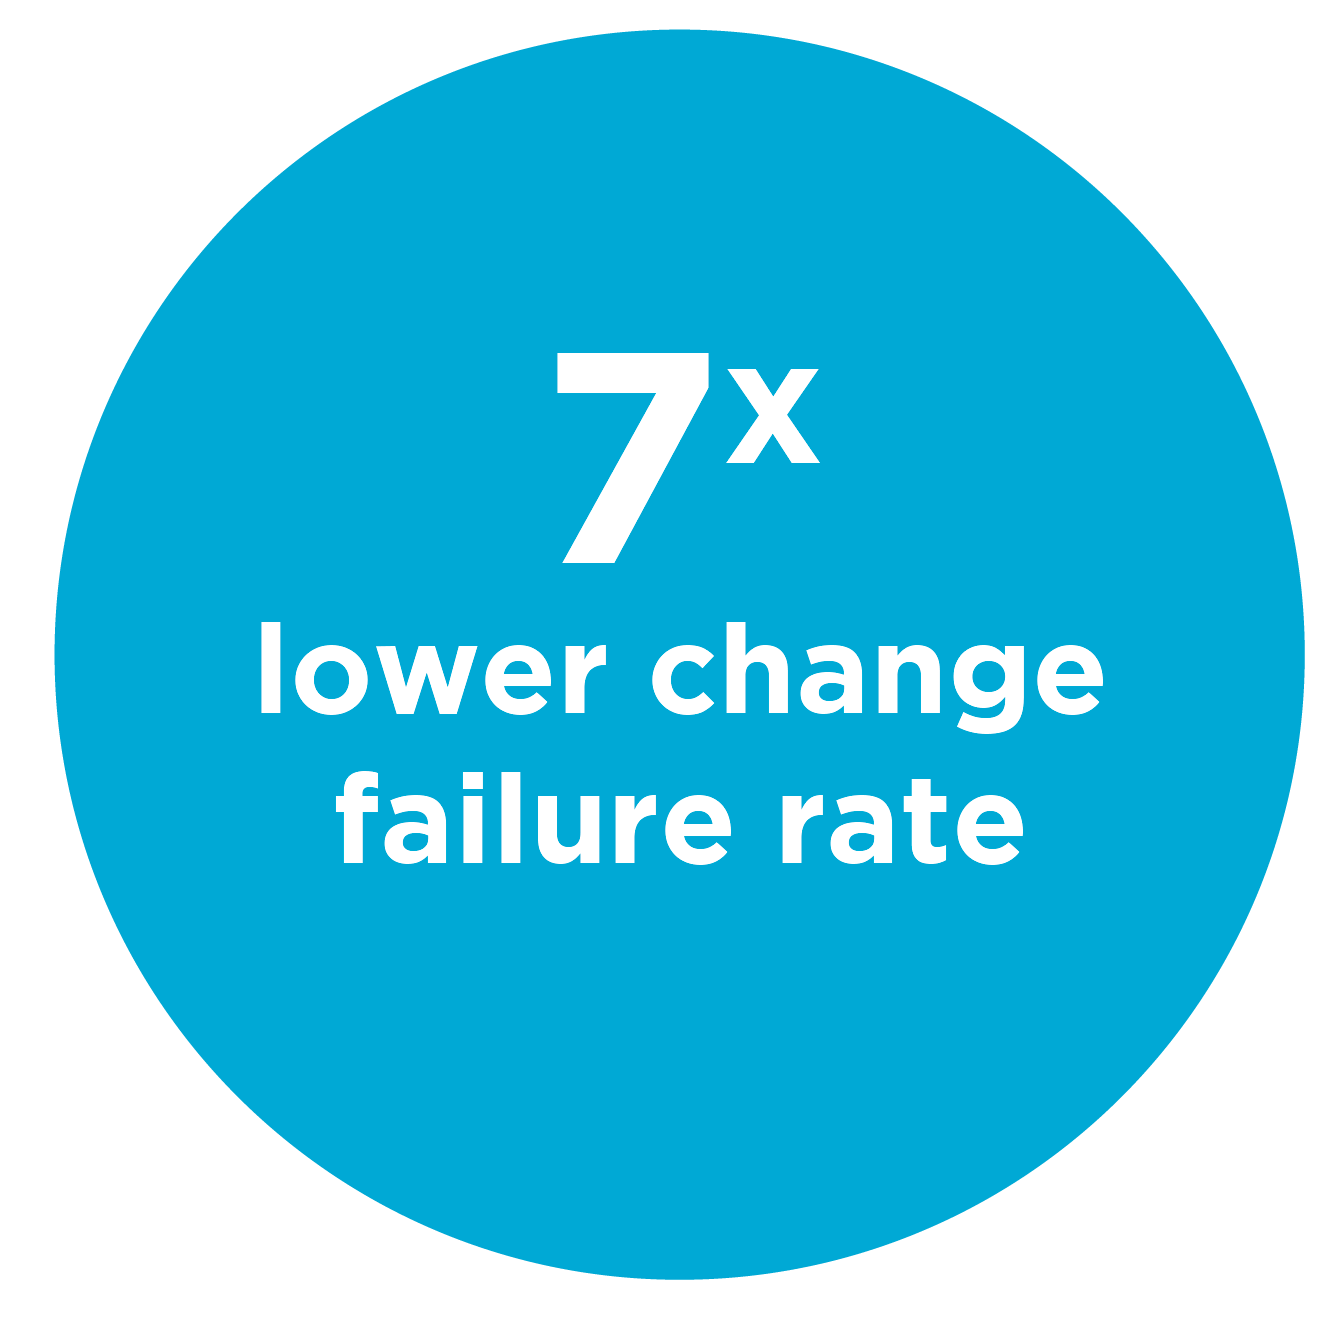 High performers have 7x lower change failure rates